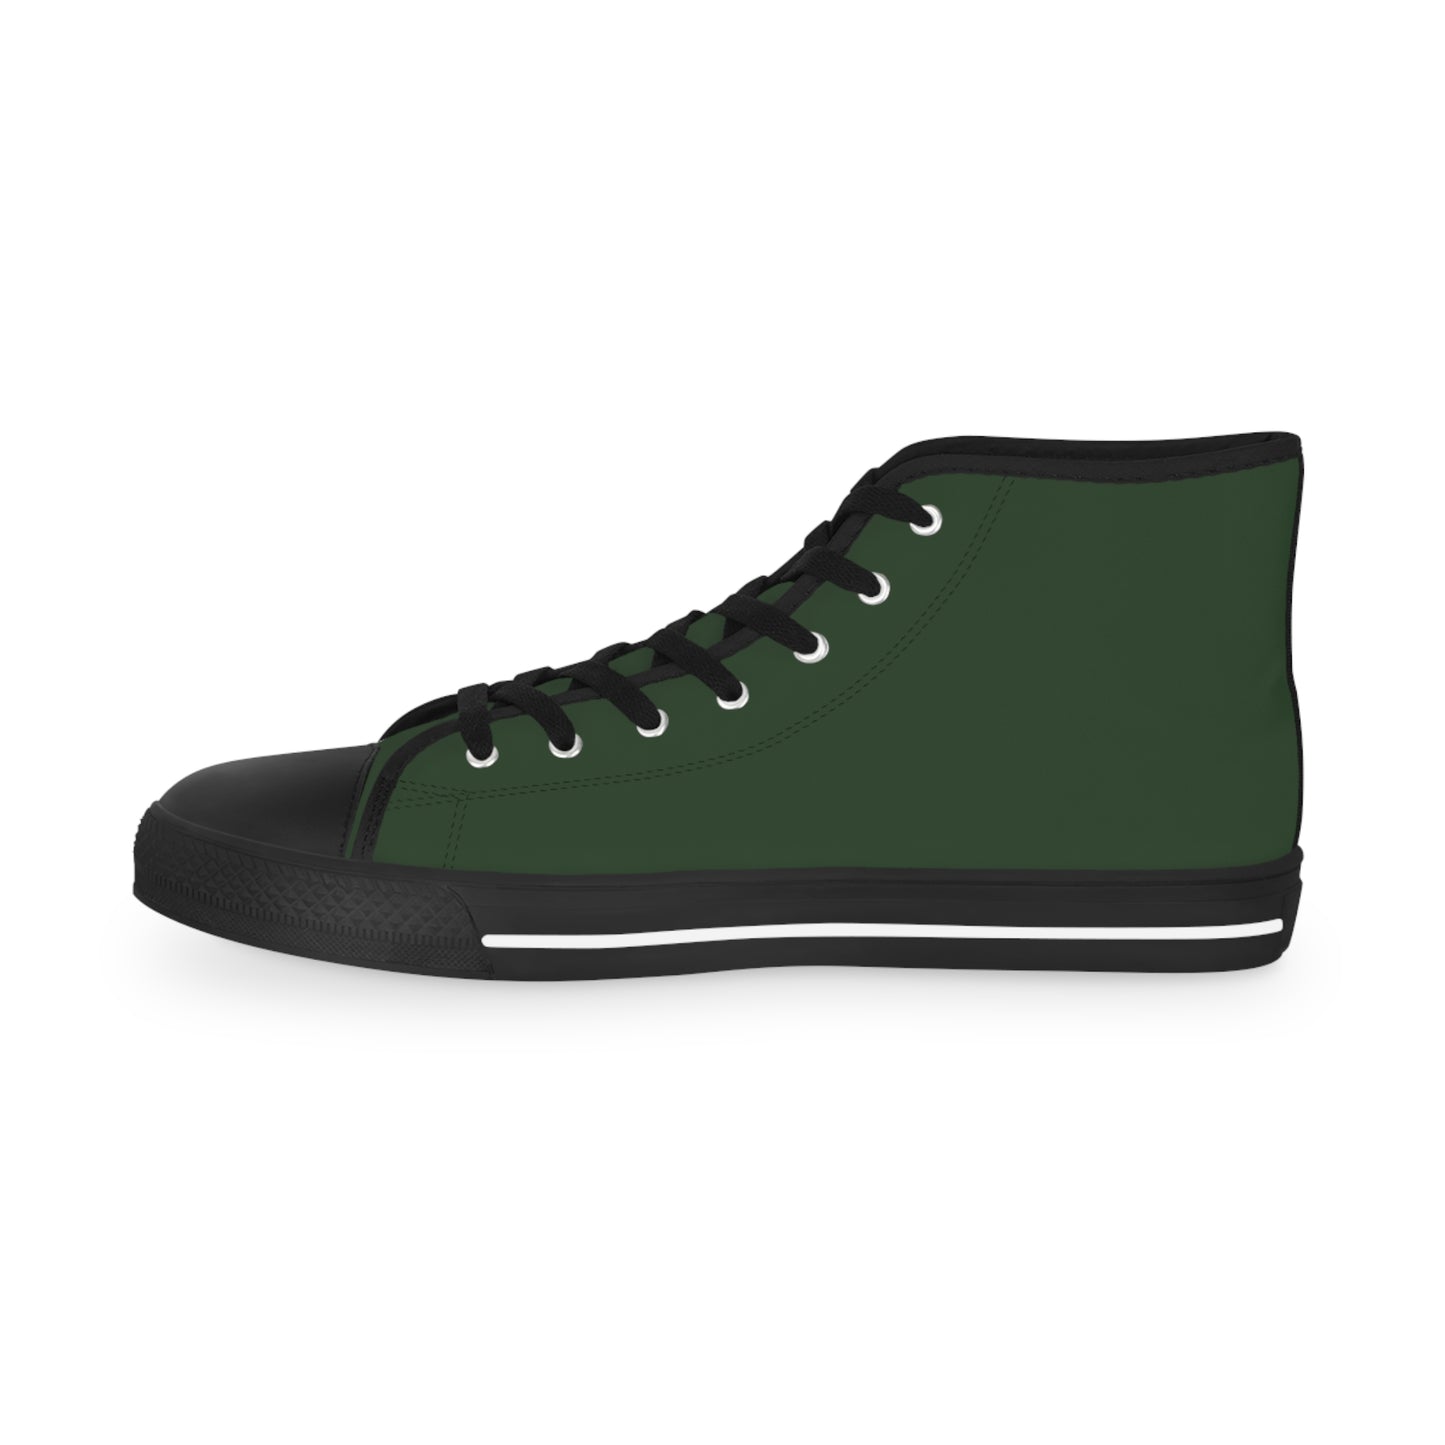 Men's Canvas High Top Solid Color Sneakers - Hunter Green US 14 White sole